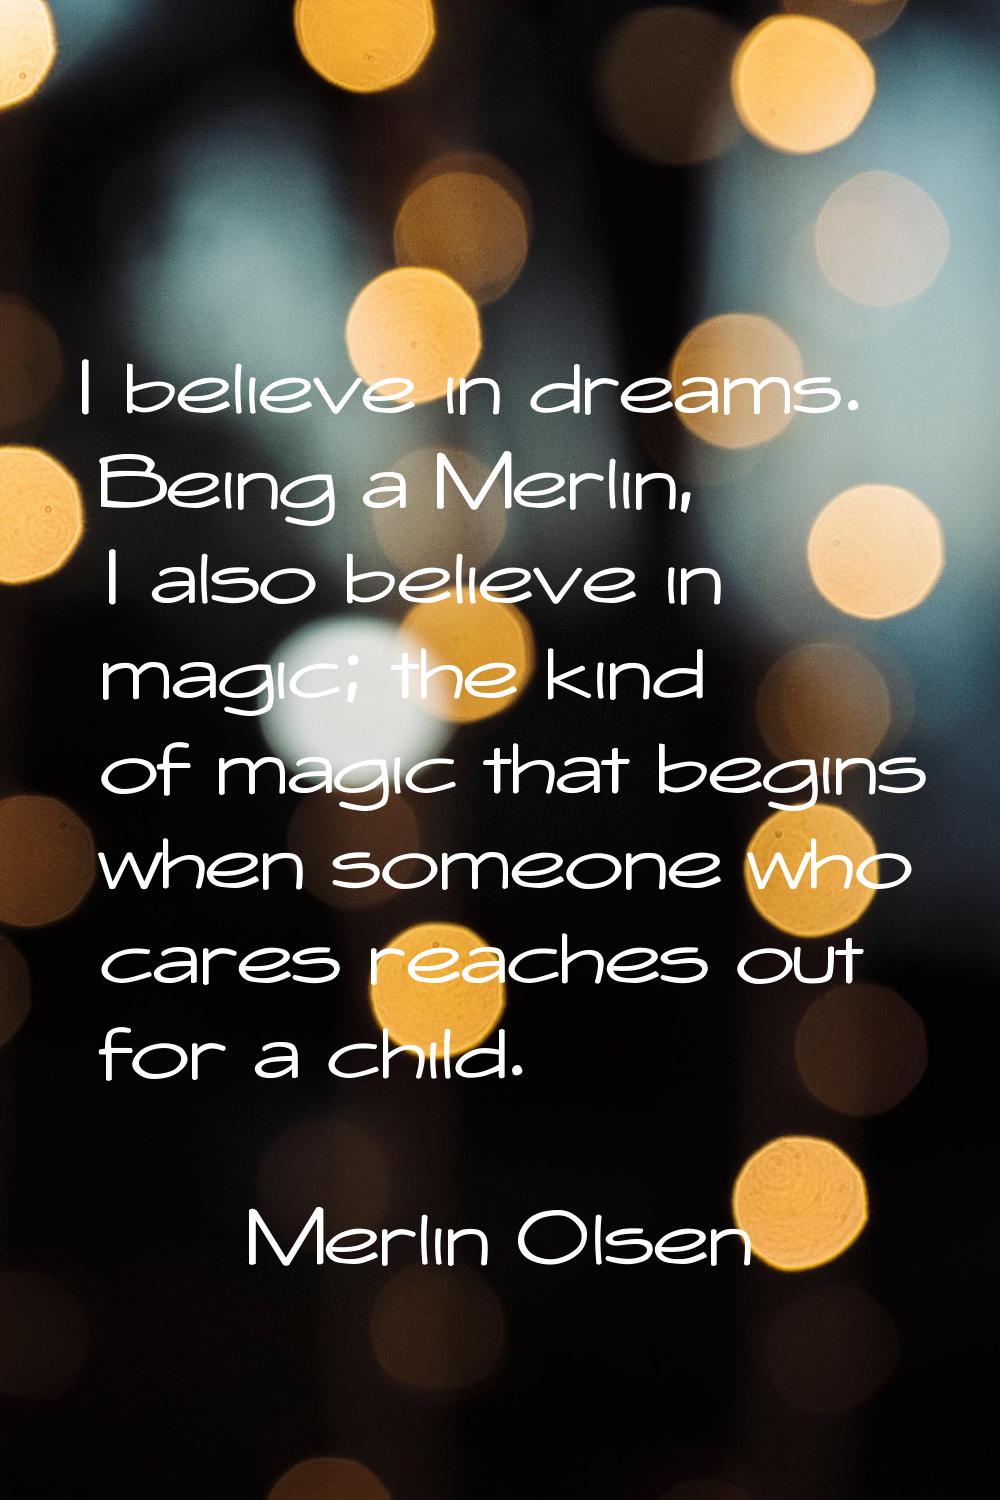 I believe in dreams. Being a Merlin, I also believe in magic; the kind of magic that begins when so